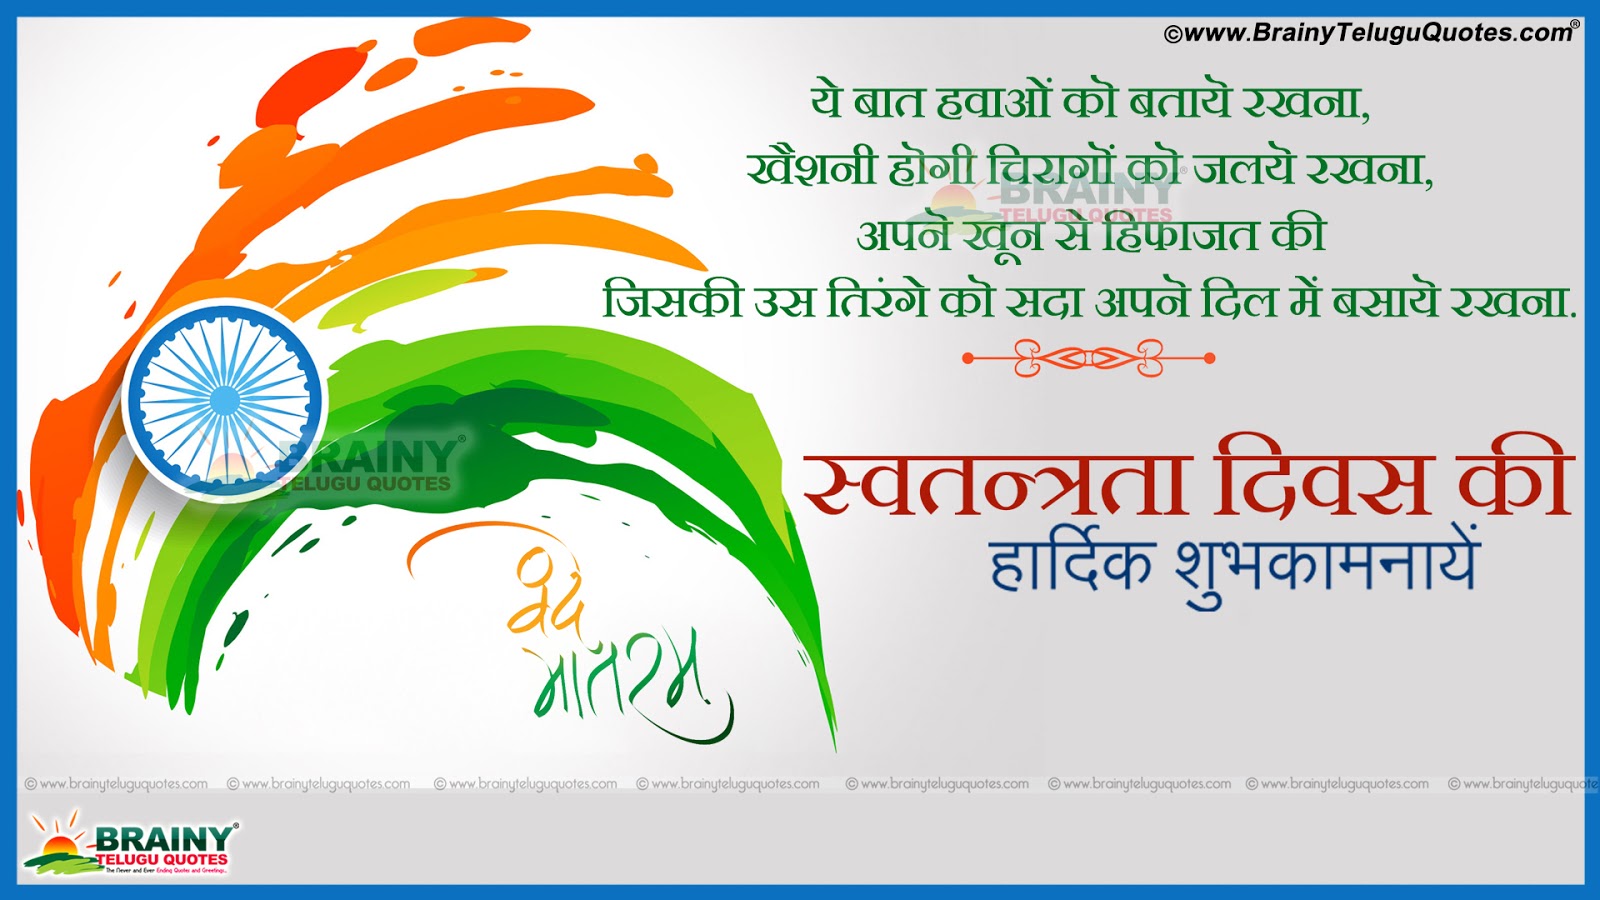 Independence Day 2016 Greetings Quotes in Hindi | BrainyTeluguQuotes ...